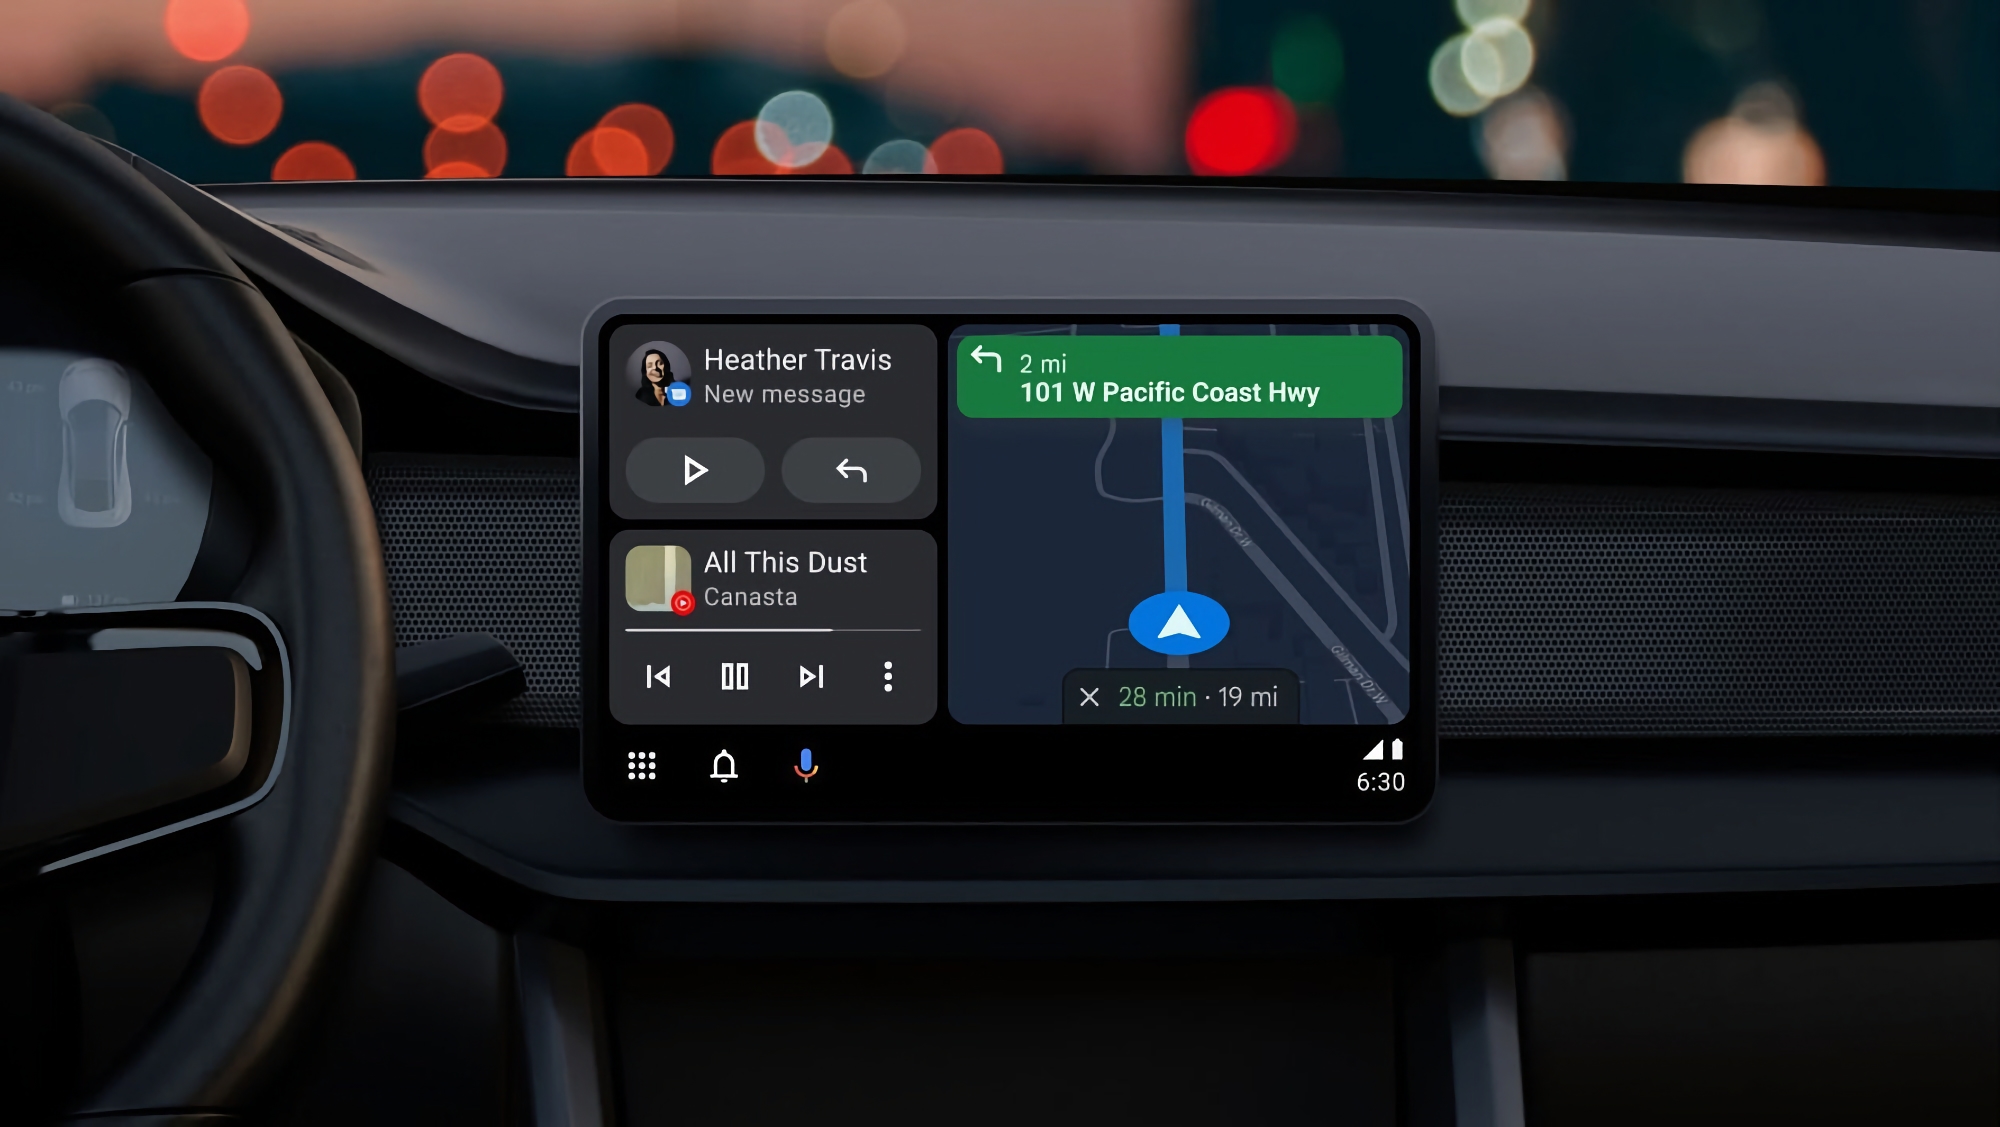 Honda has announced an update that adds wireless Android Auto and Apple CarPlay support to 2018-2022 Accord vehicles